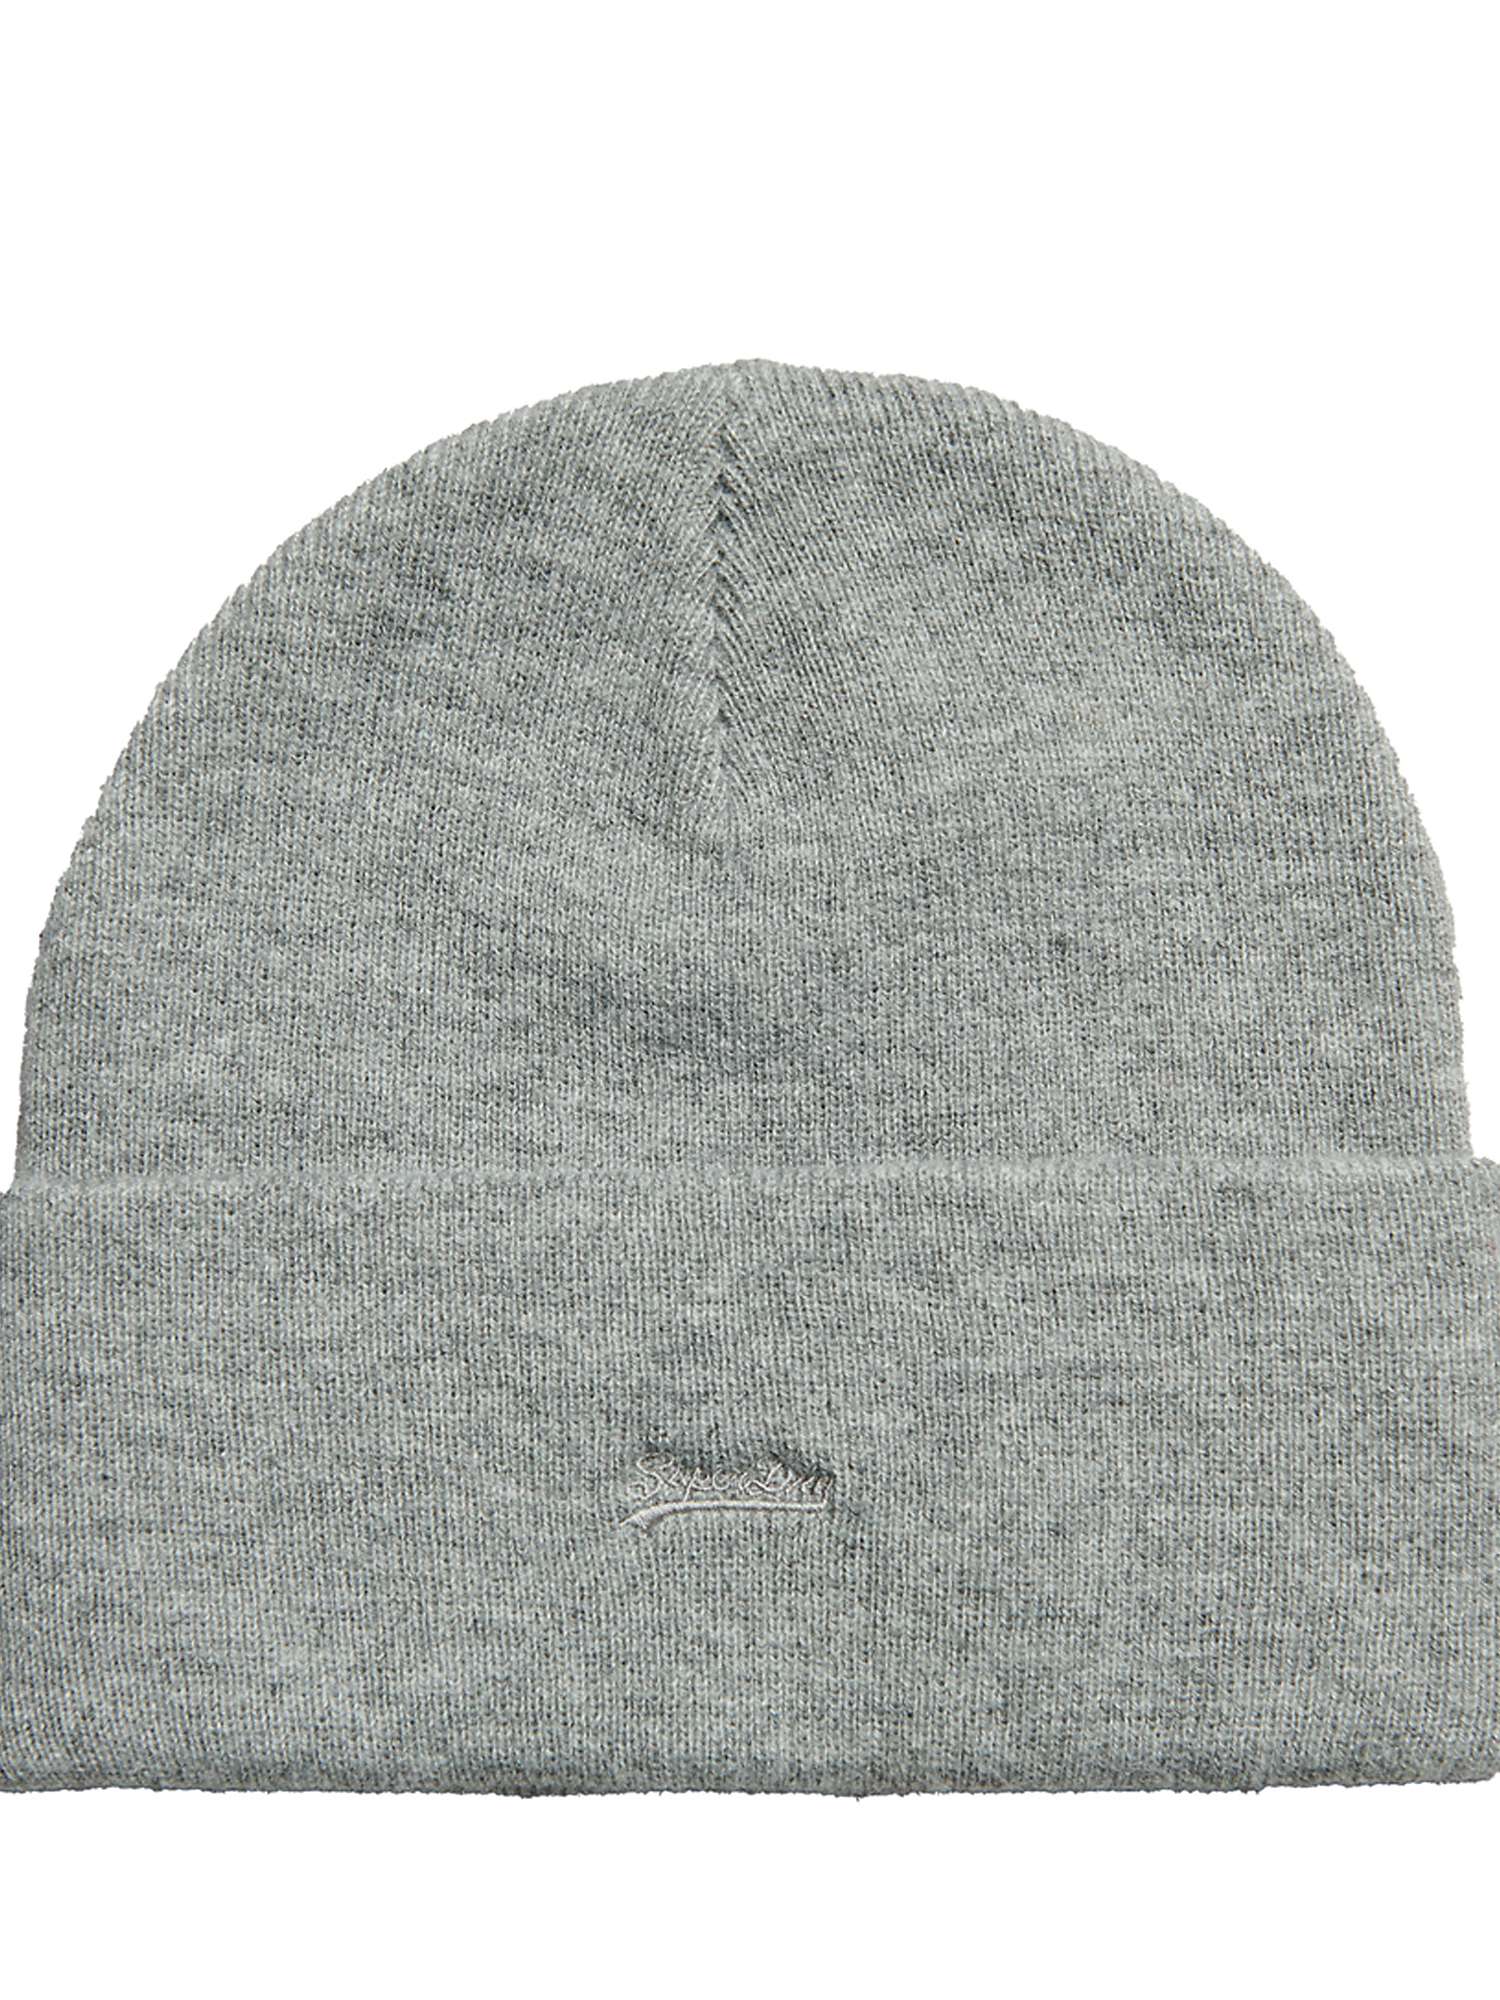 Superdry Essential Logo Beanie, Silver at John Lewis & Partners